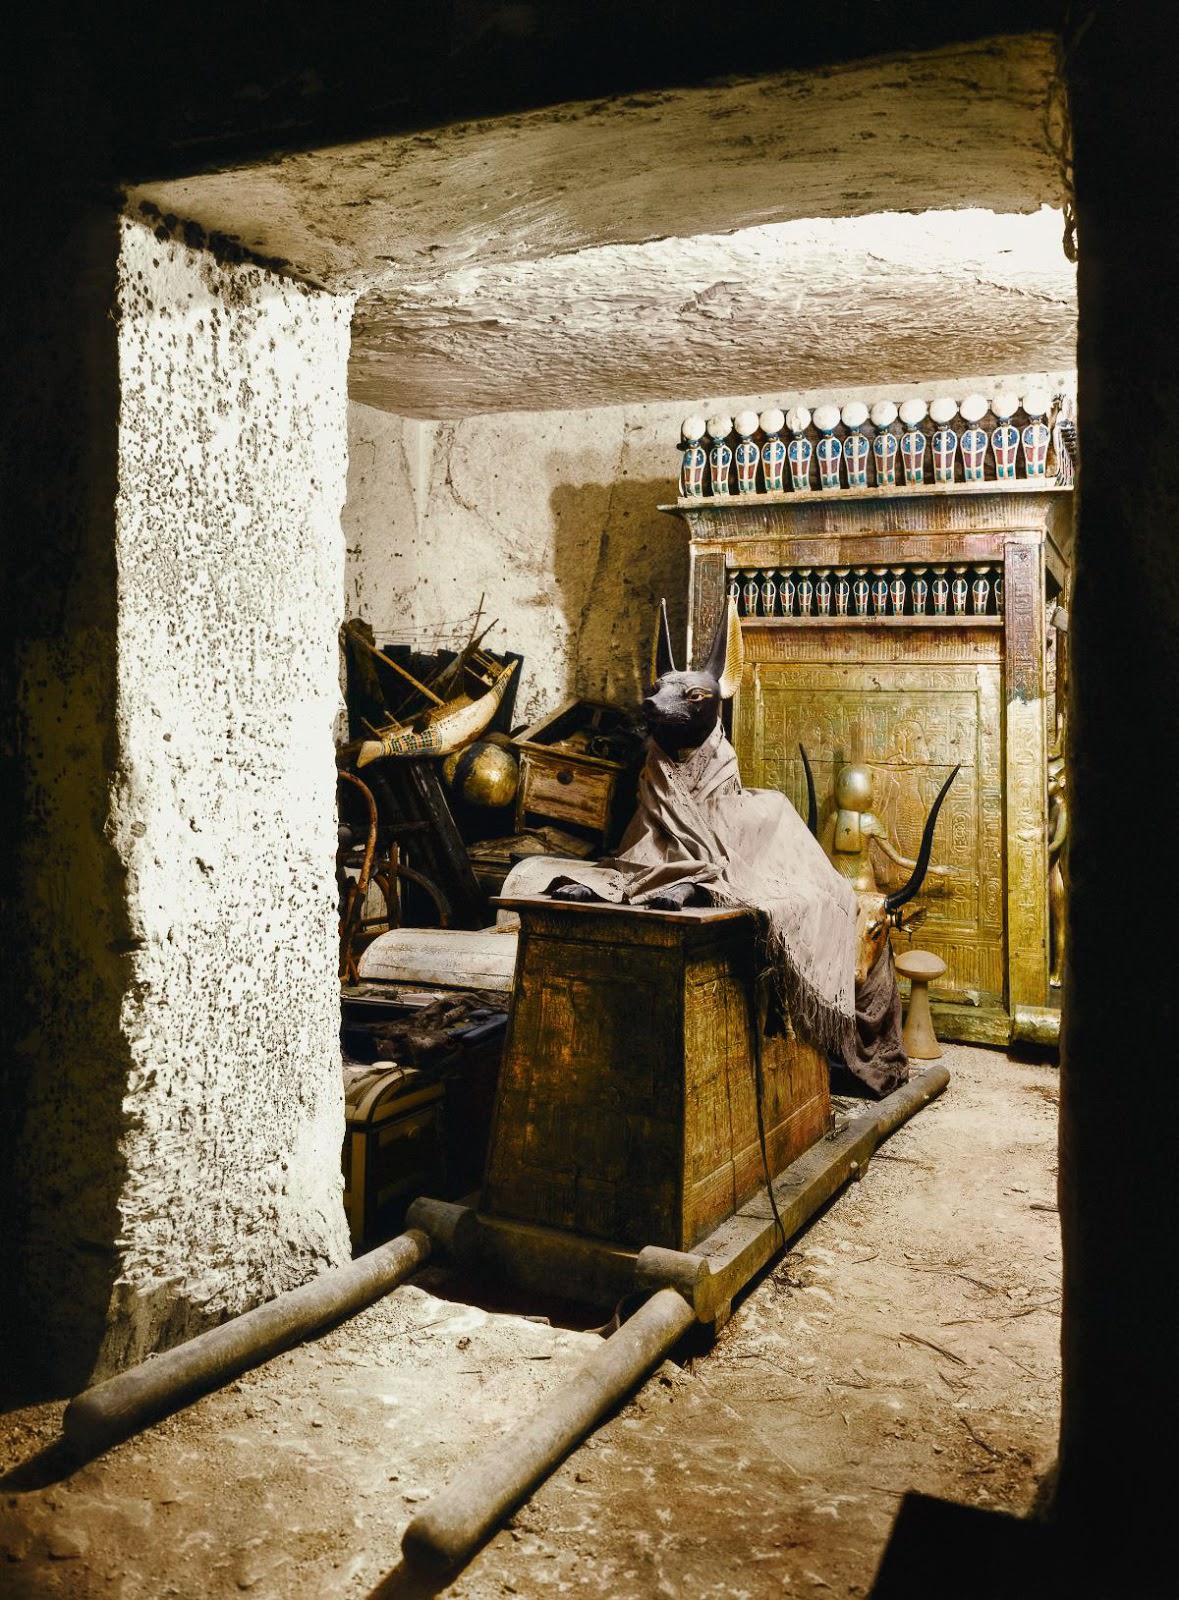 The Anubis shrine (Carter no. 261) on the threshold of the Treasury viewed from the Burial Chamber.